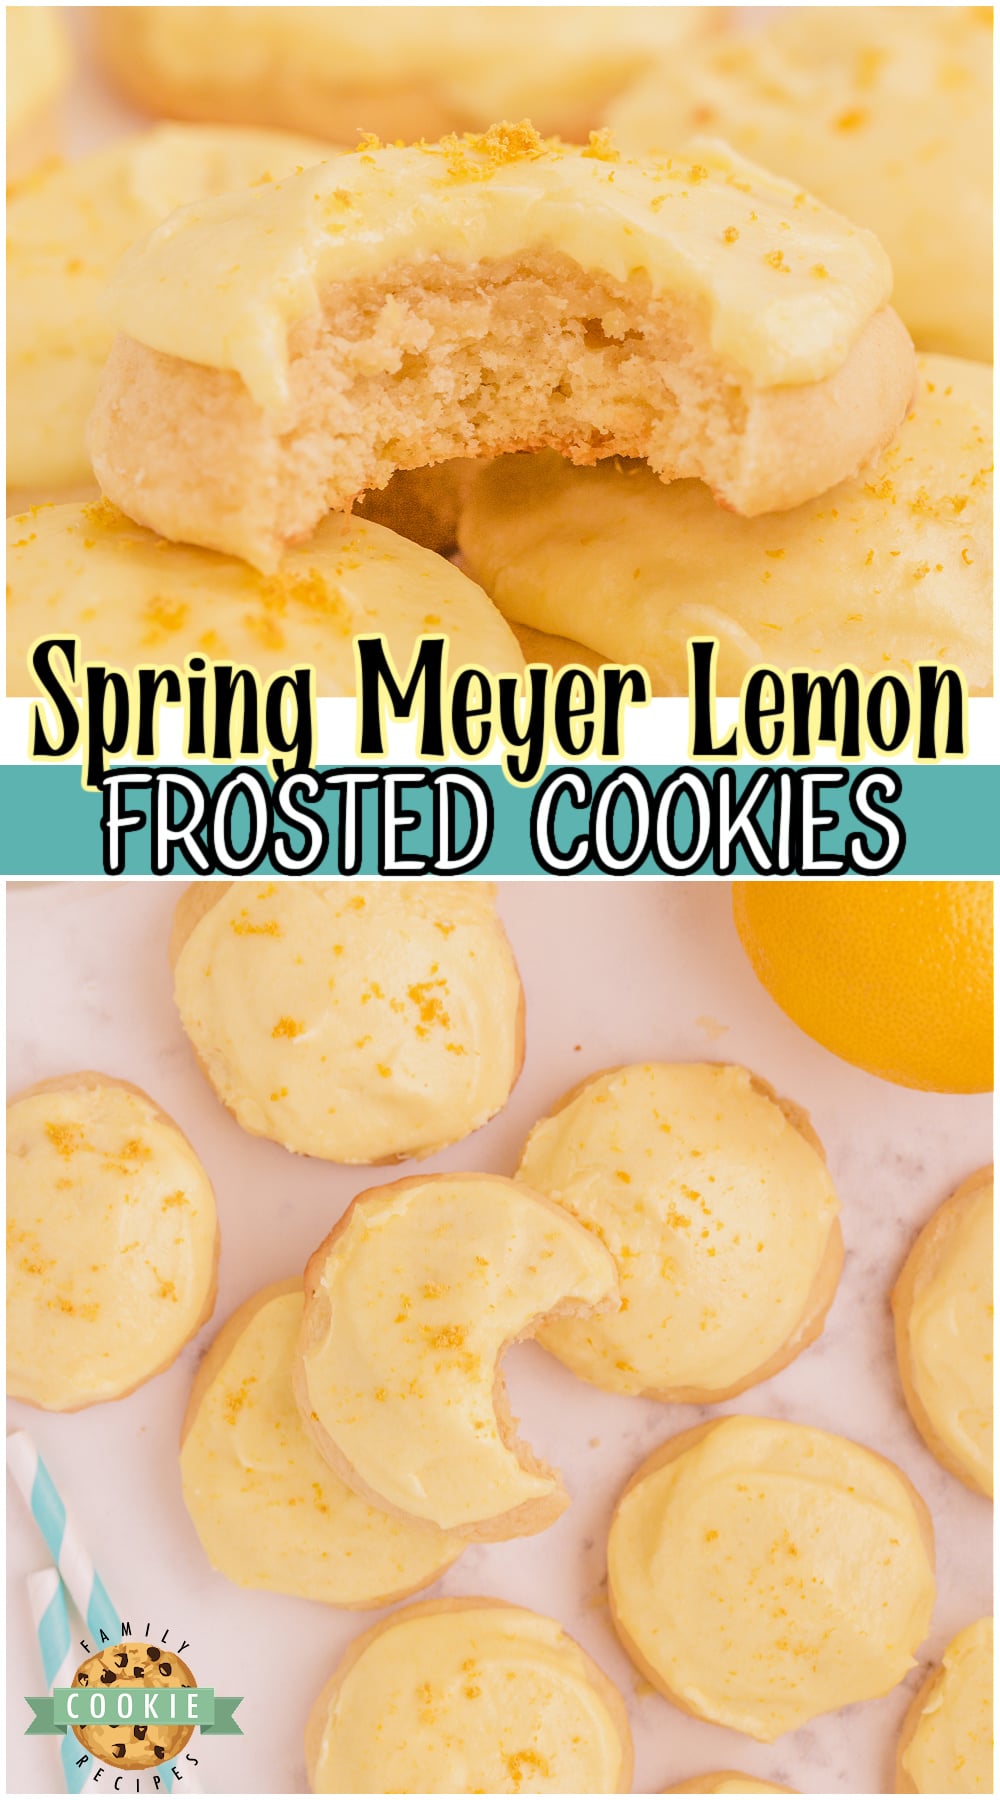 Meyer Lemon Cookies with delicious citrus flavor topped with a sweet, tangy frosting. Frosted lemon cookie recipe made with simple ingredients for a bright, fresh treat!